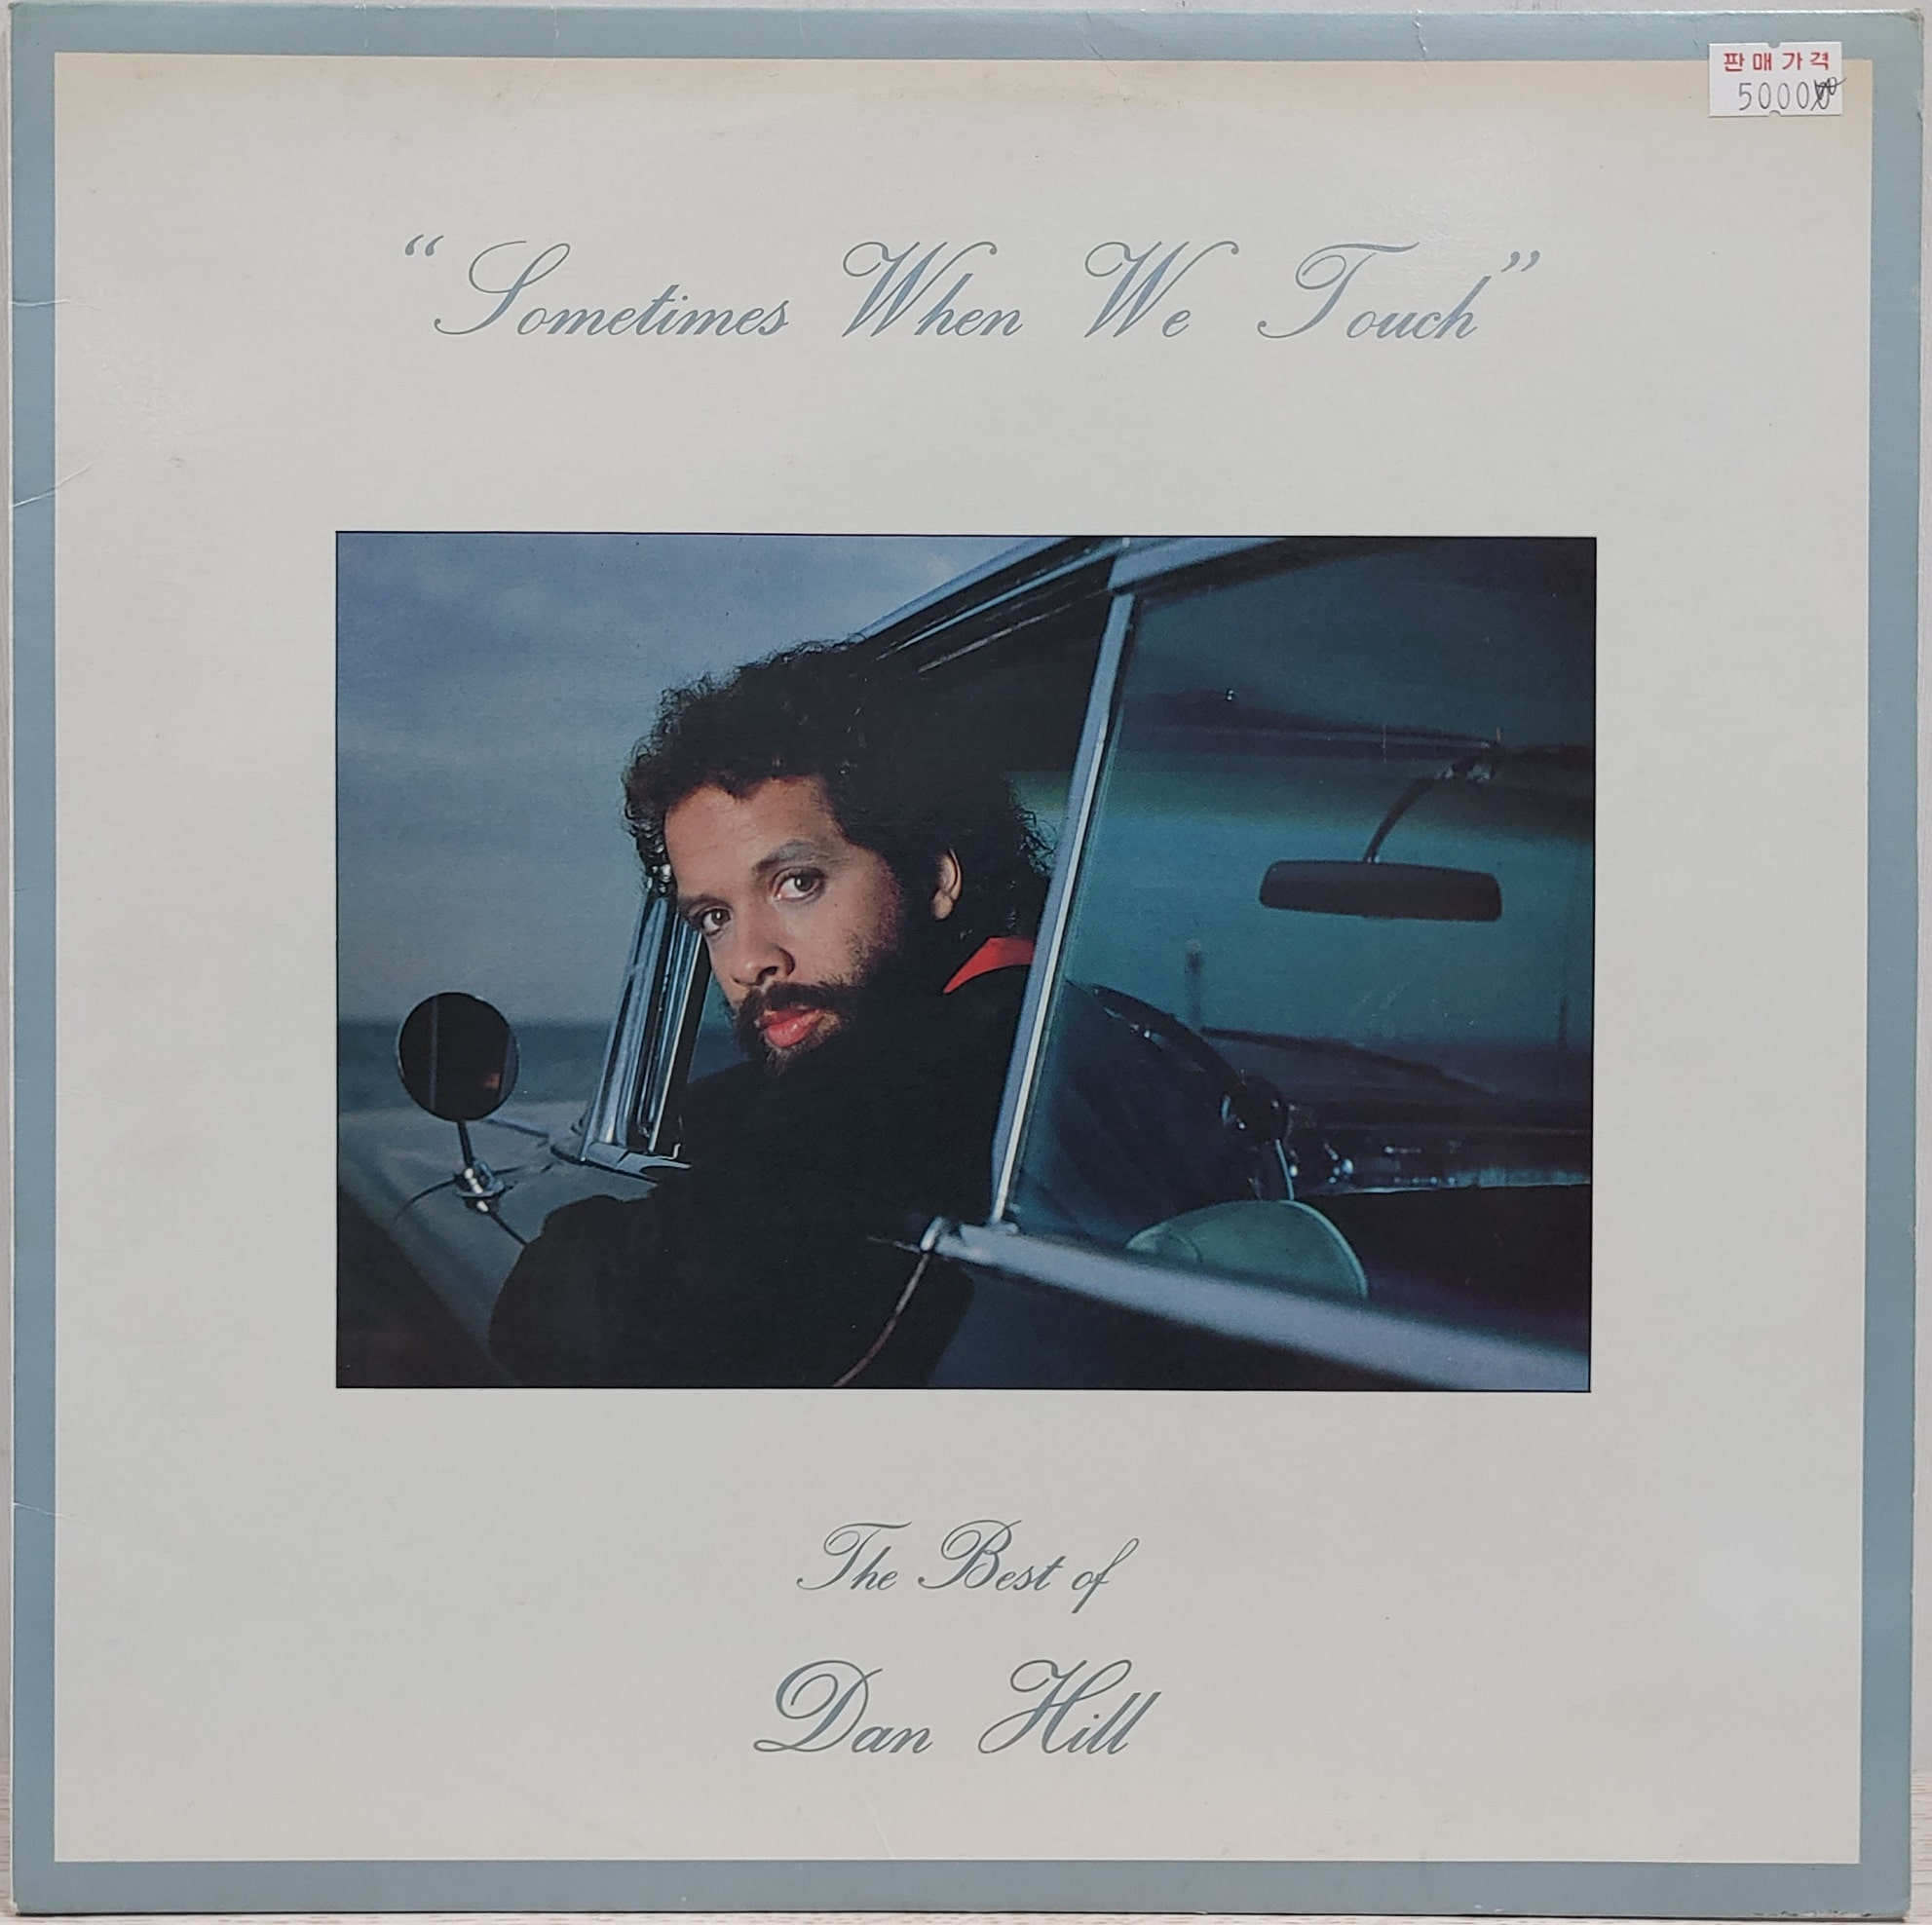 DAN HILL / &quot;SOMETIMES WHEN WE TOUCH&quot; THE BEST OF DAN HILL